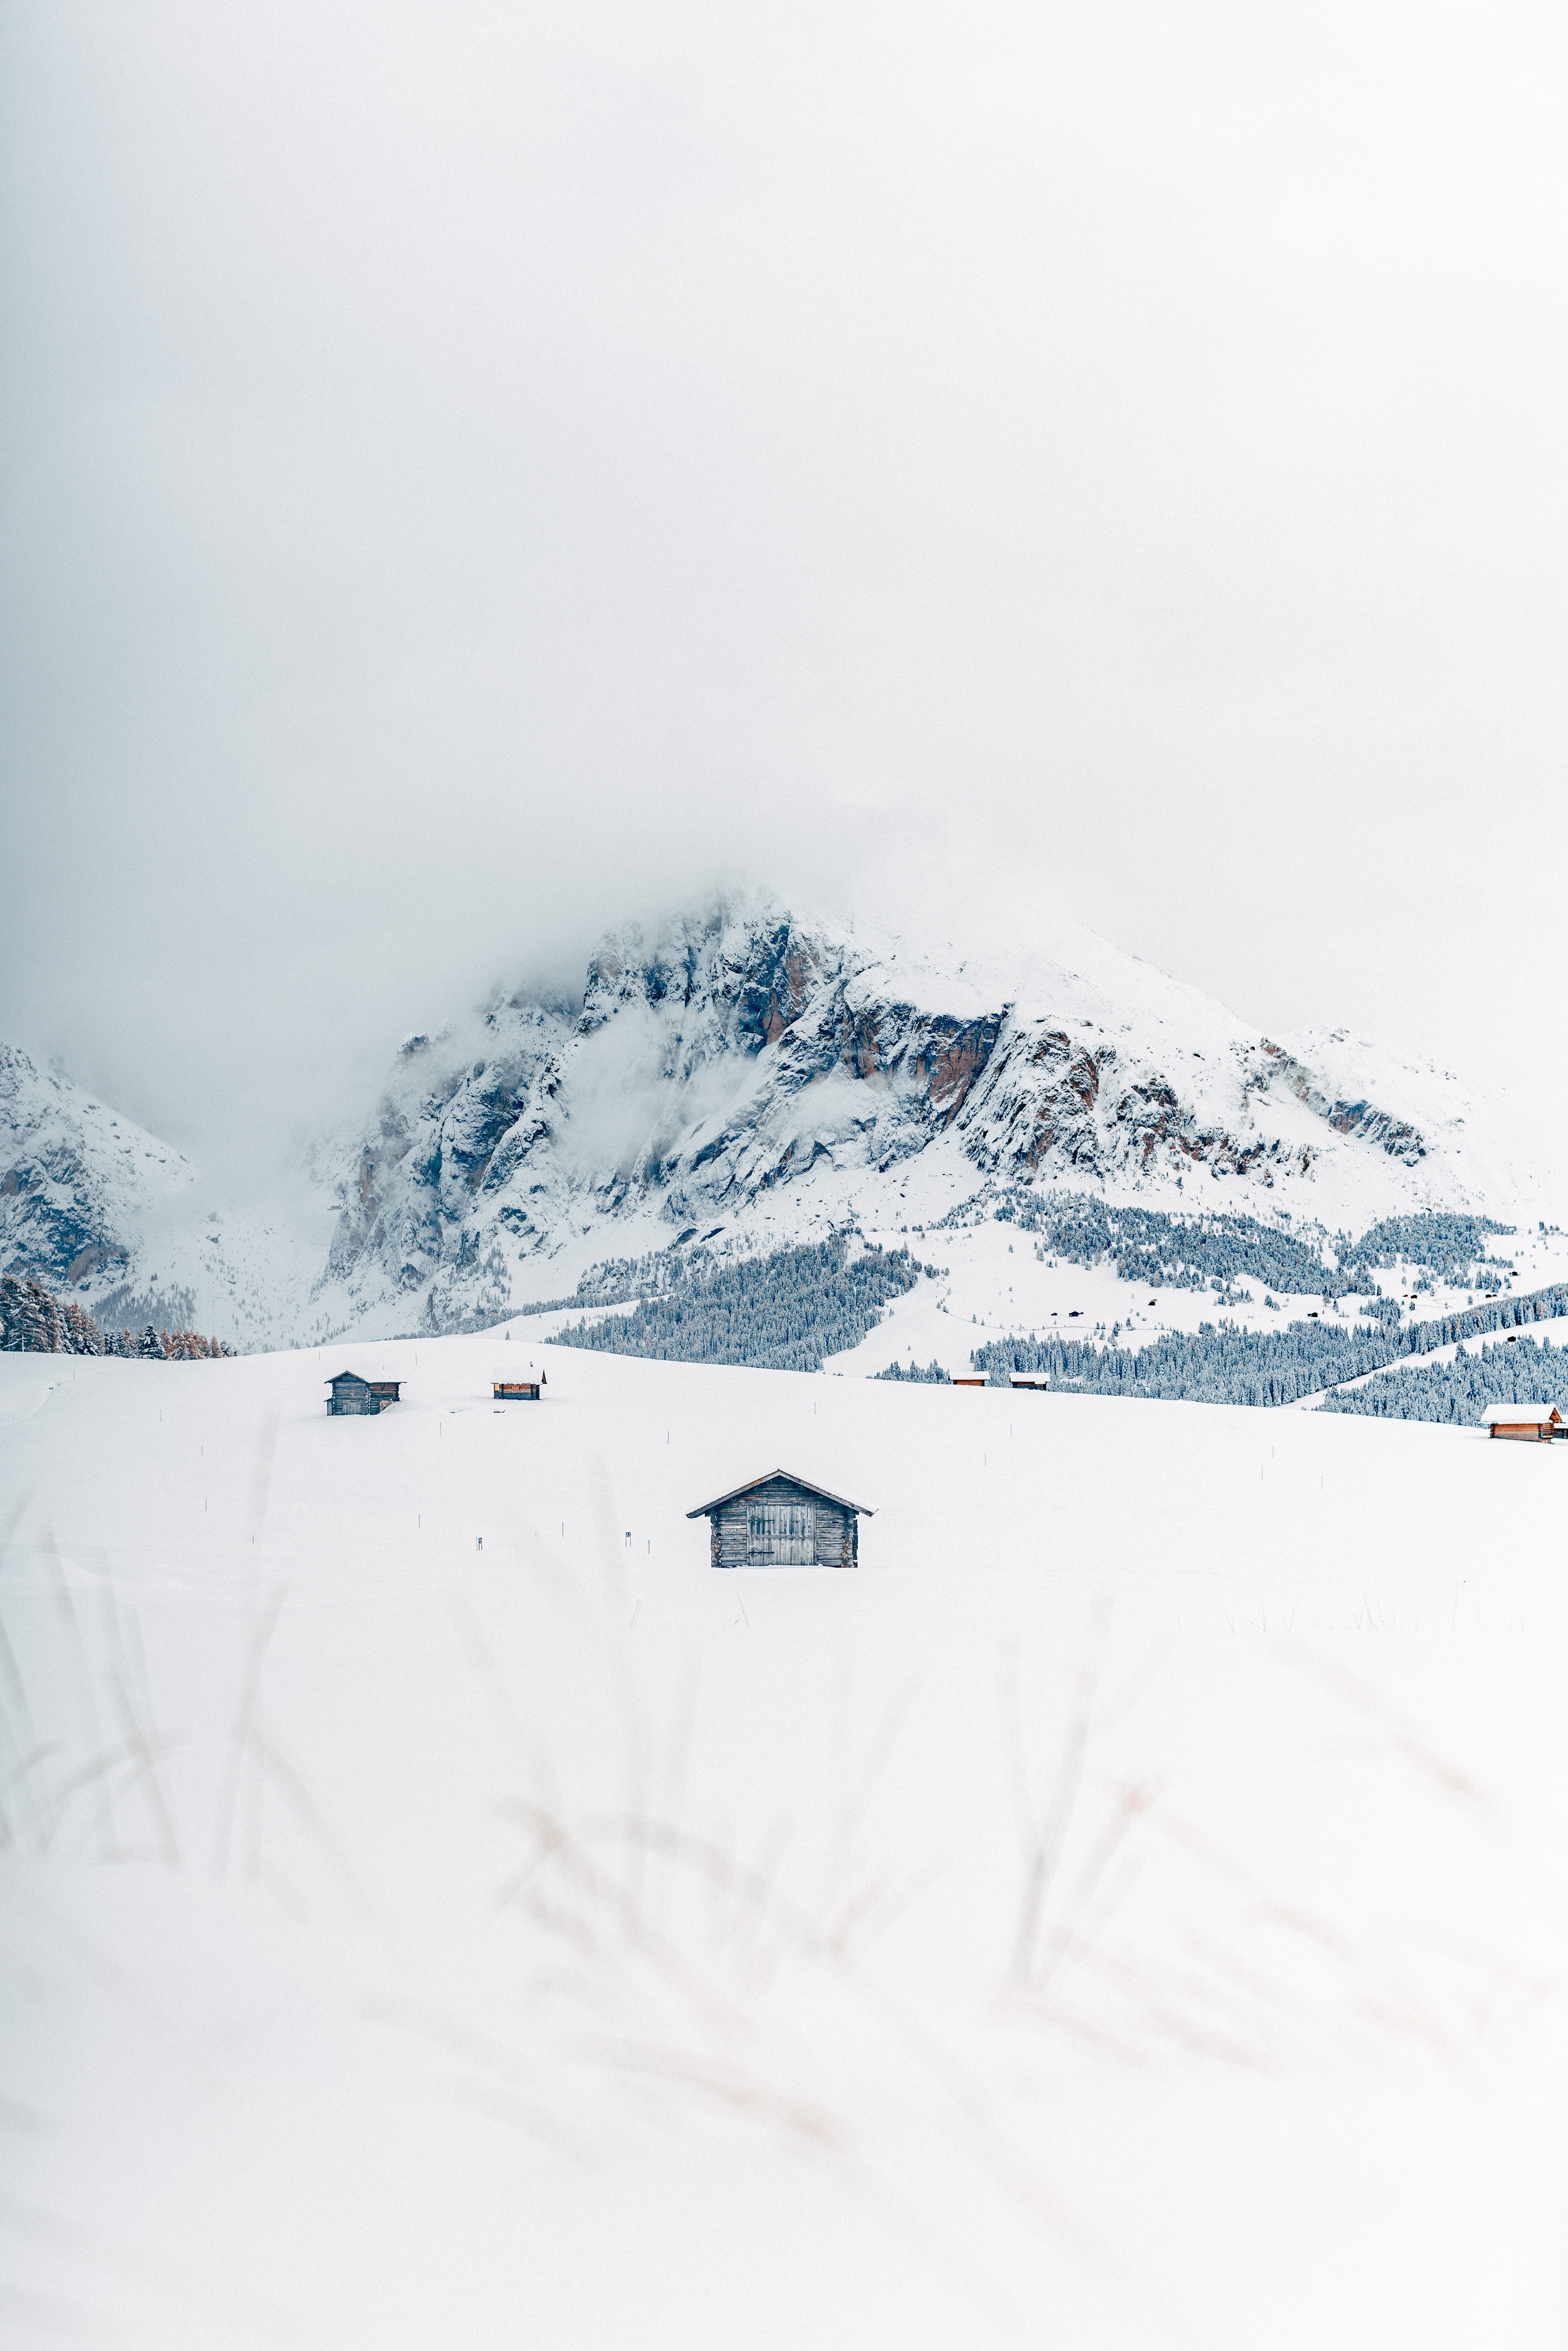 landscape, winter, nature, houses, mountains, snow, small houses 1080p